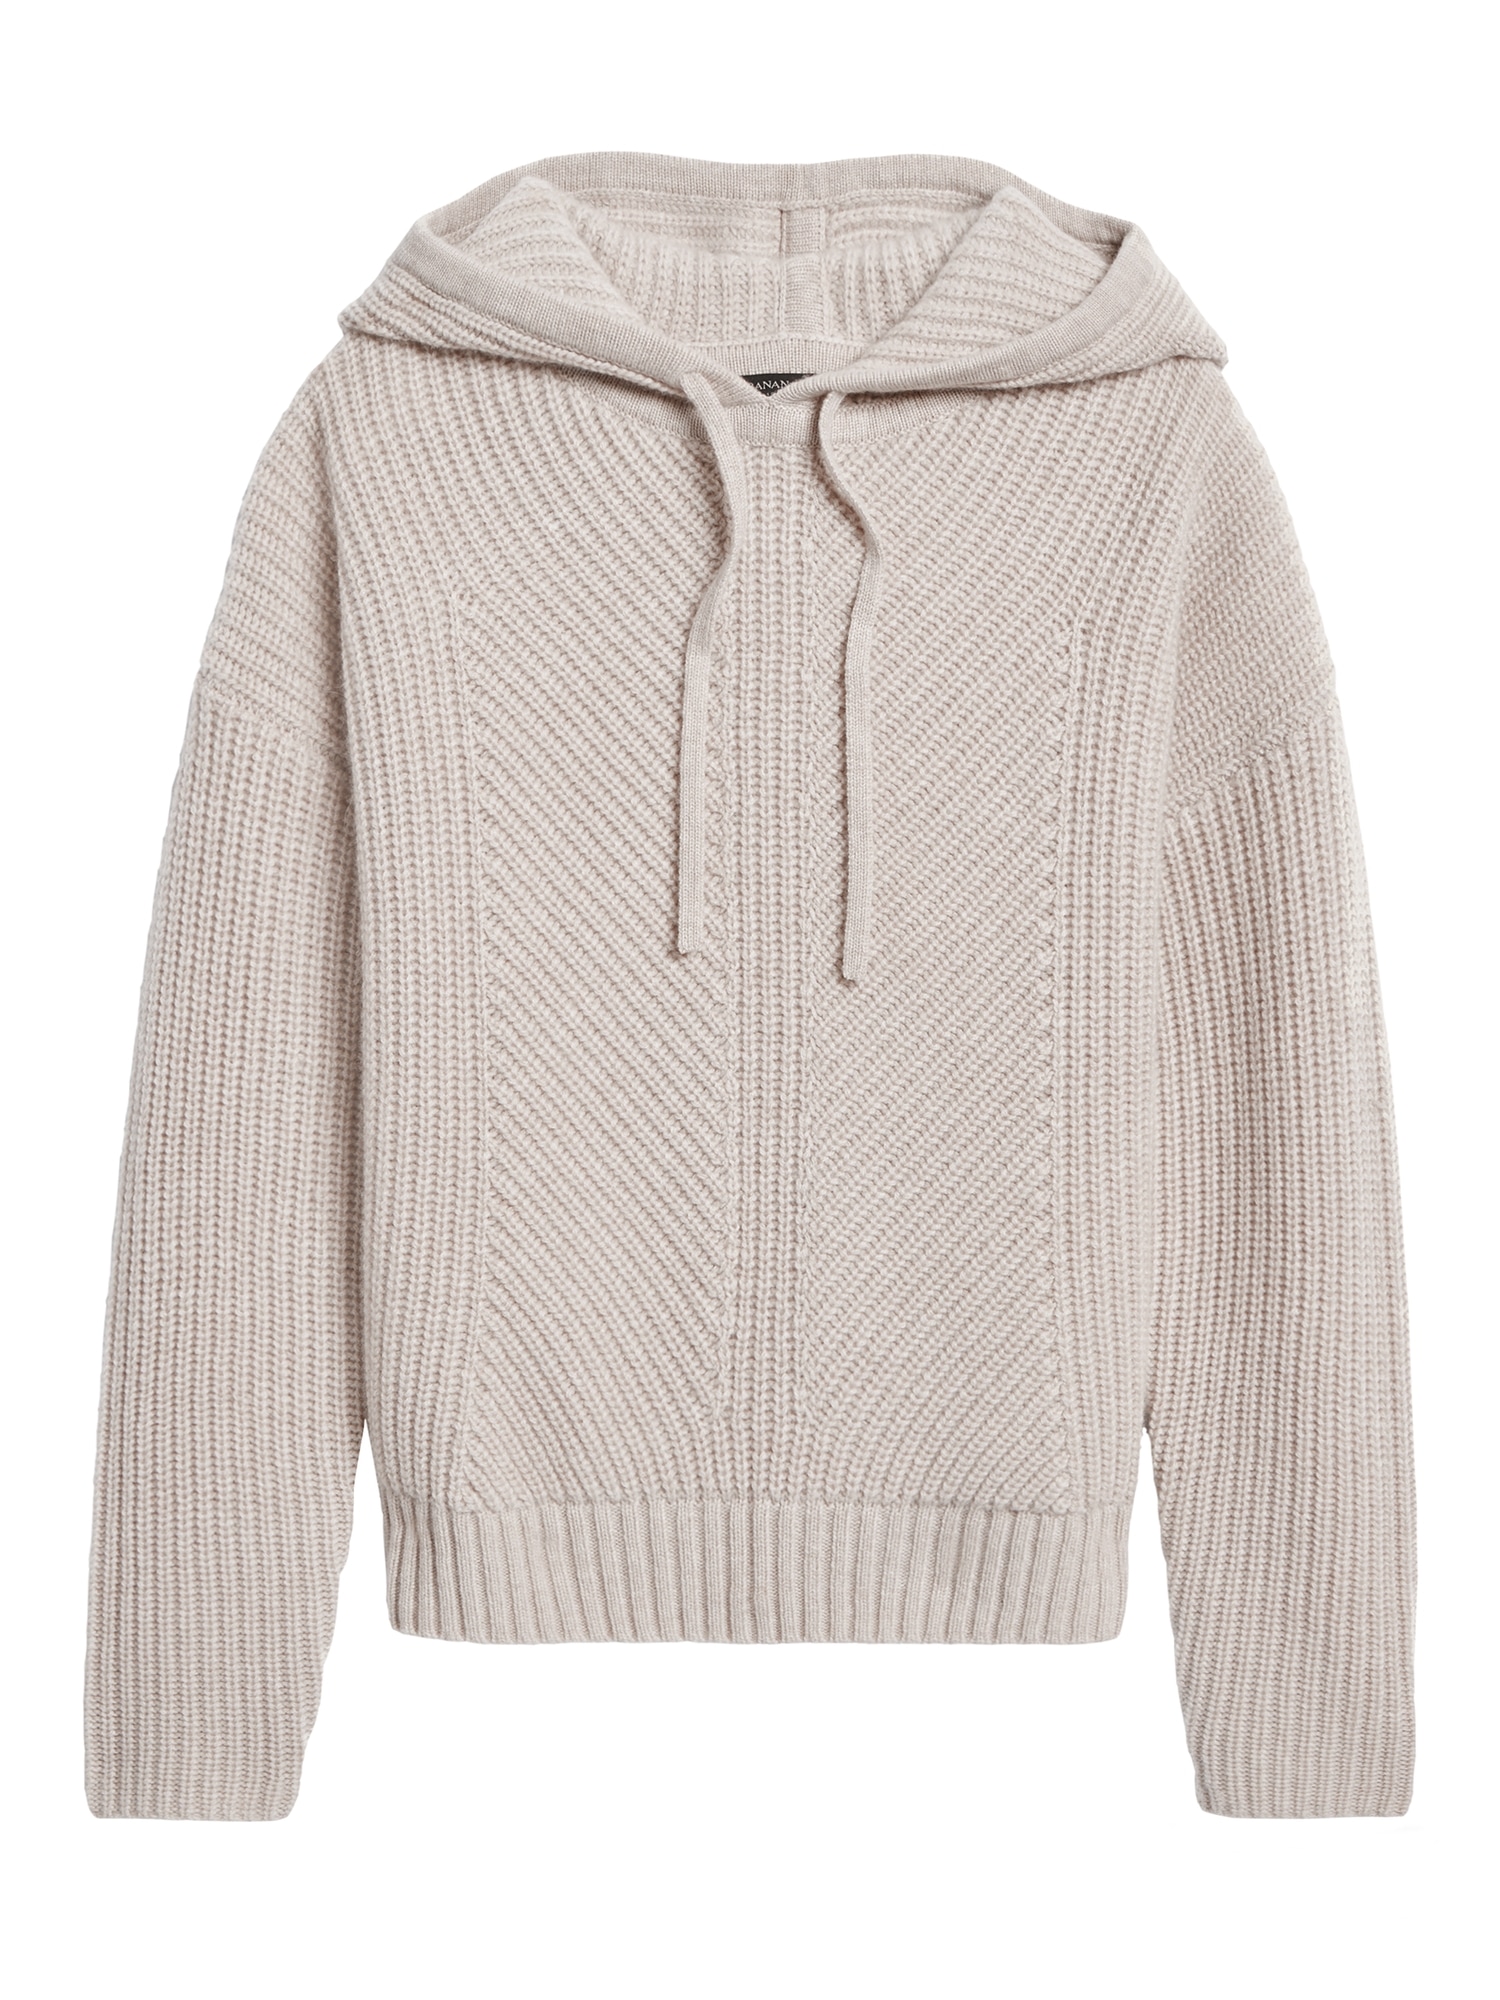 Cashmere Boxy Cropped Hoodie